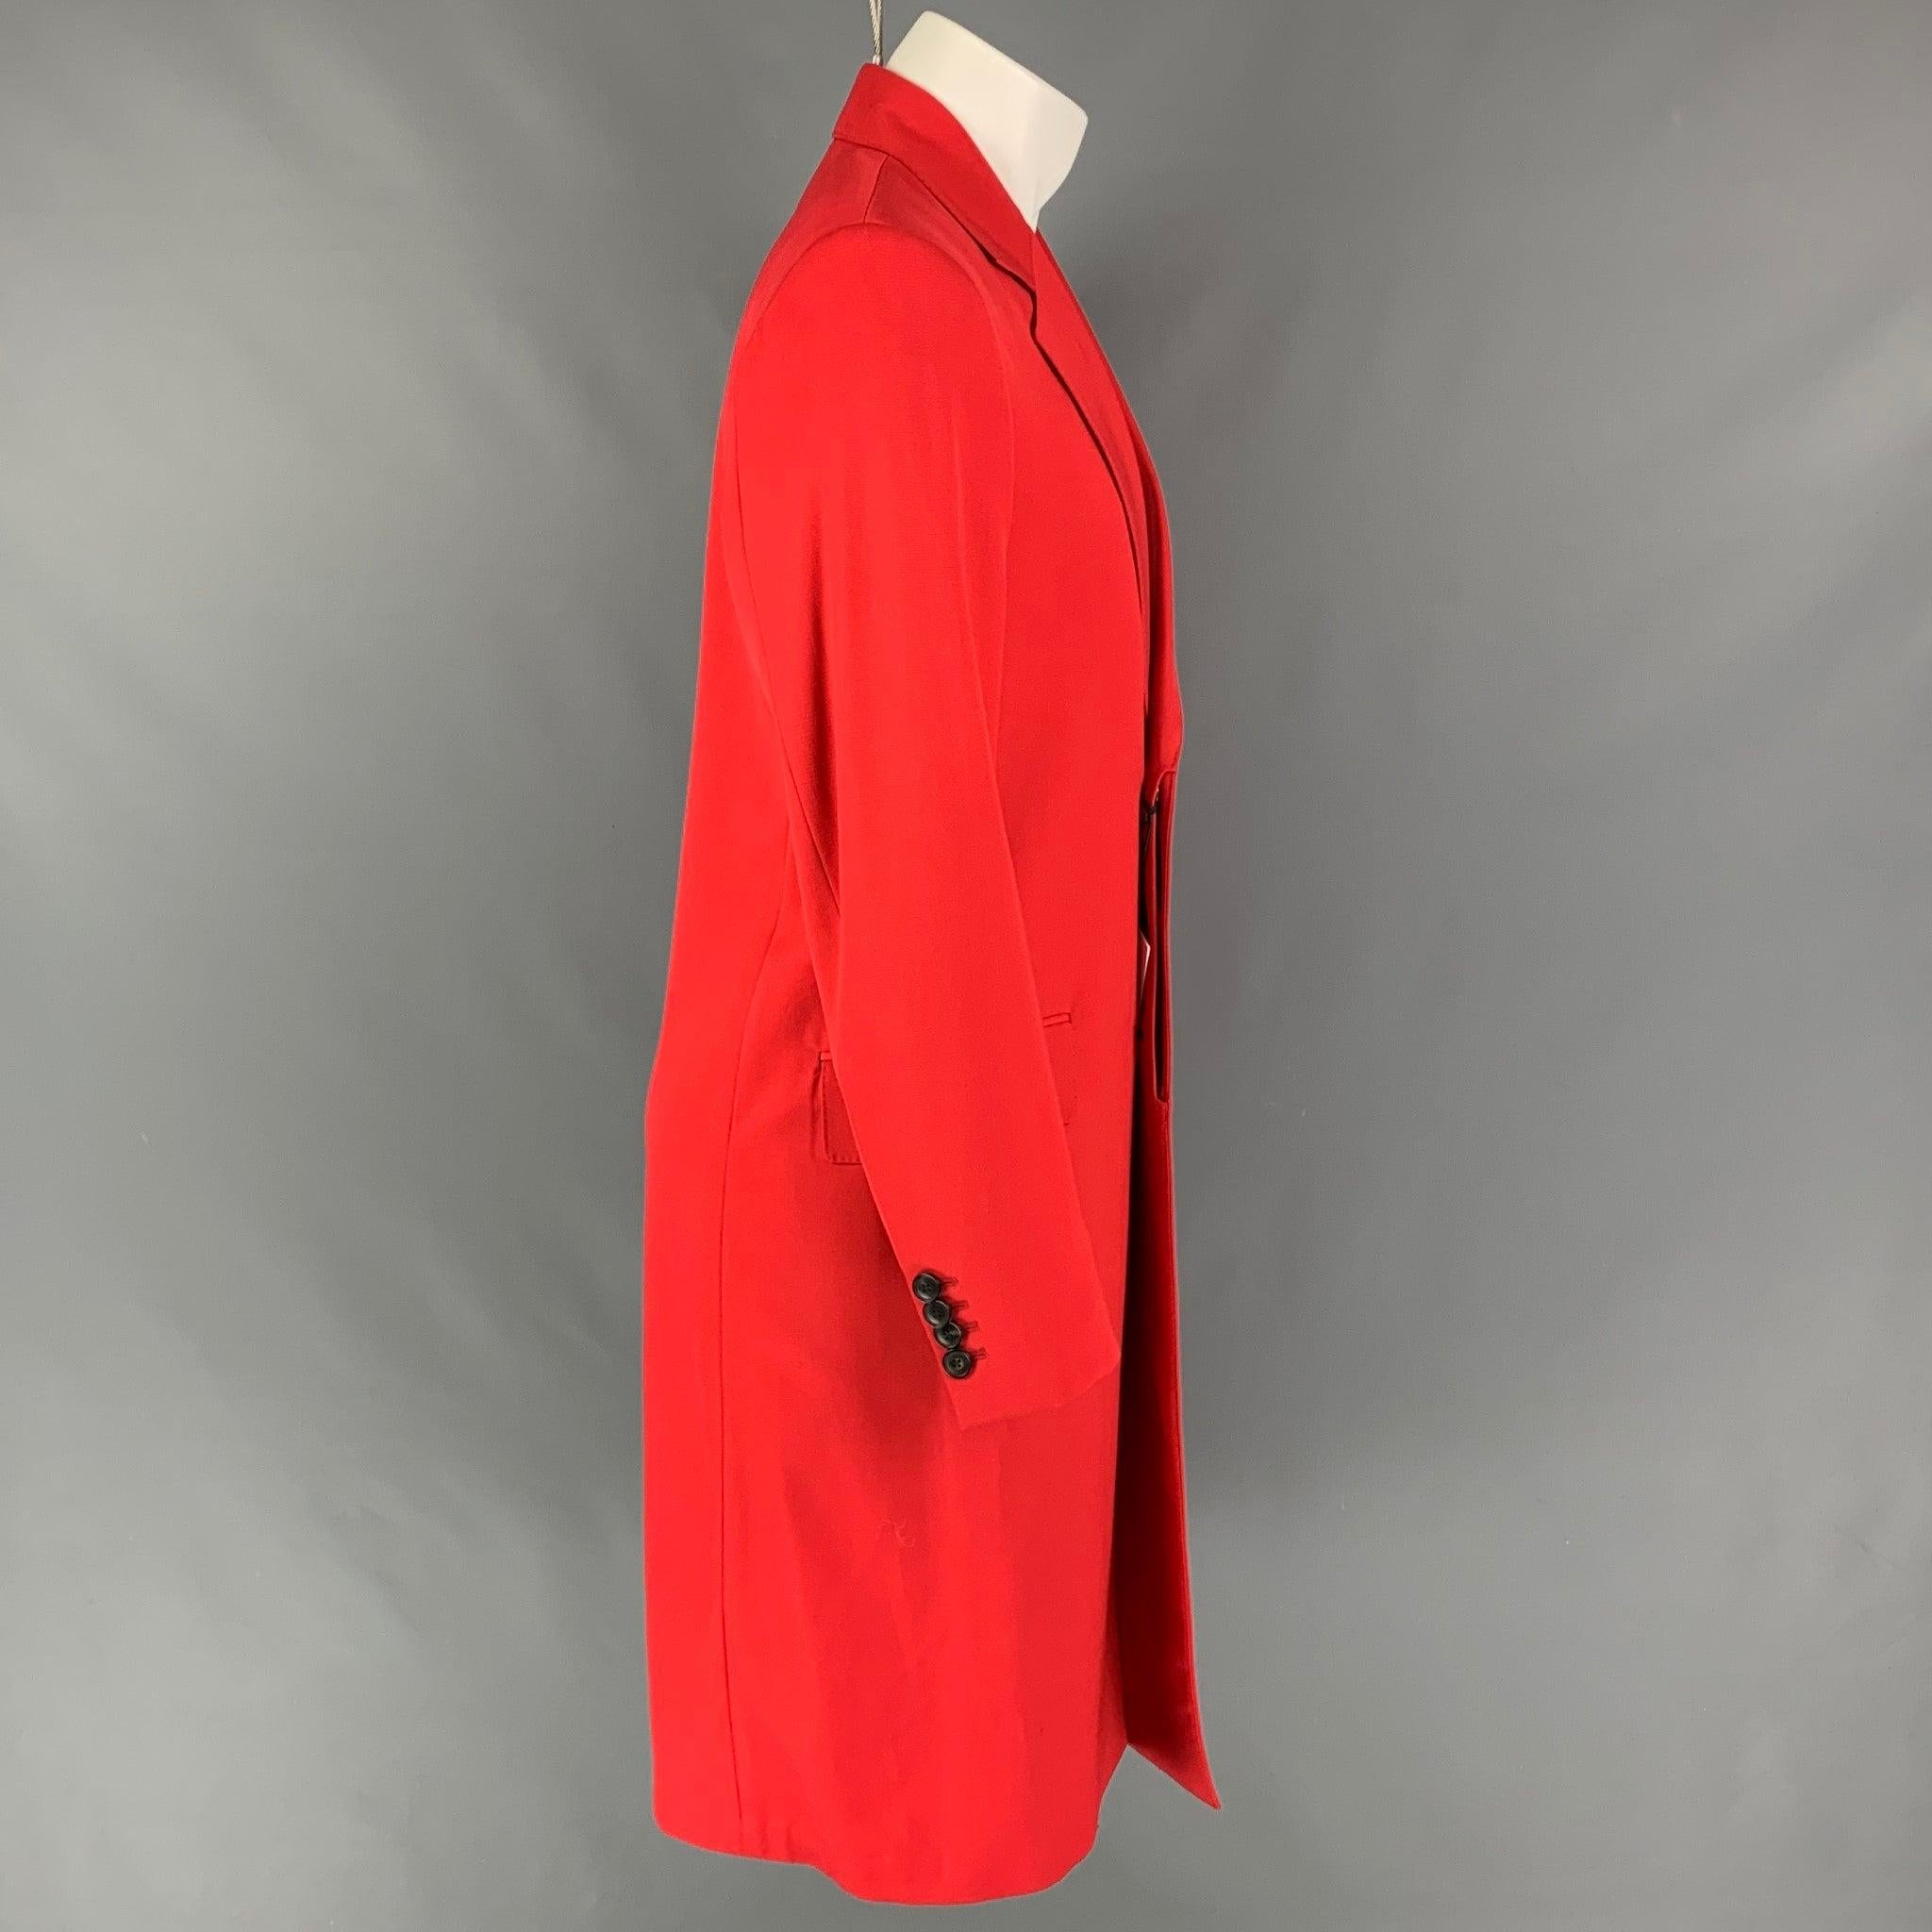 PAUL SMITH coat comes in a red wool / polyamide featuring a notch lapel, flap pockets, single back vent, and a hidden placket closure. Made in Italy.
New With Tags.
 

Marked:  S 

Measurements: 
 
Shoulder: 17 inches Chest: 38 inches Sleeve: 27